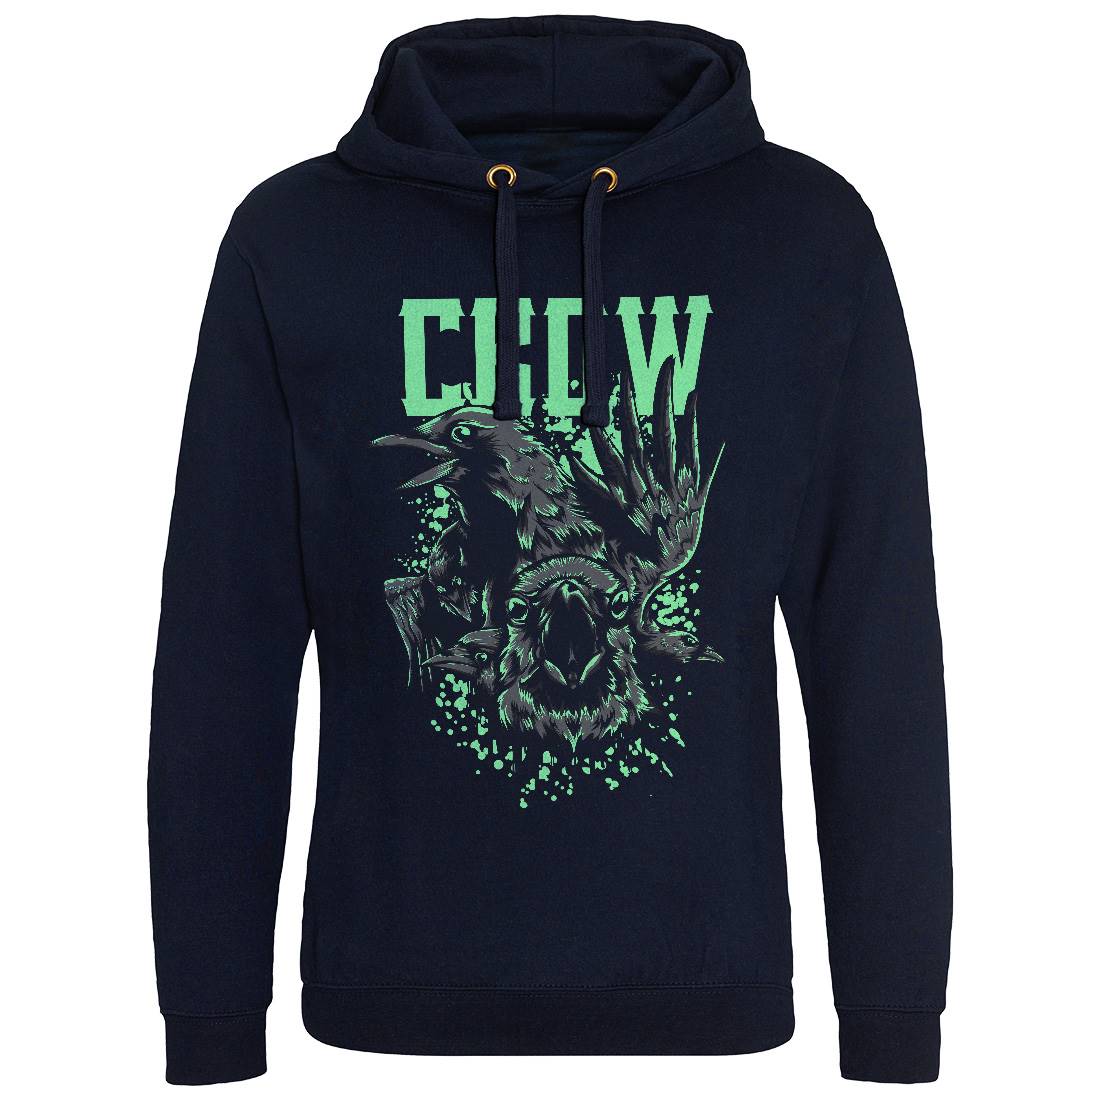 Crow Mens Hoodie Without Pocket Horror D850